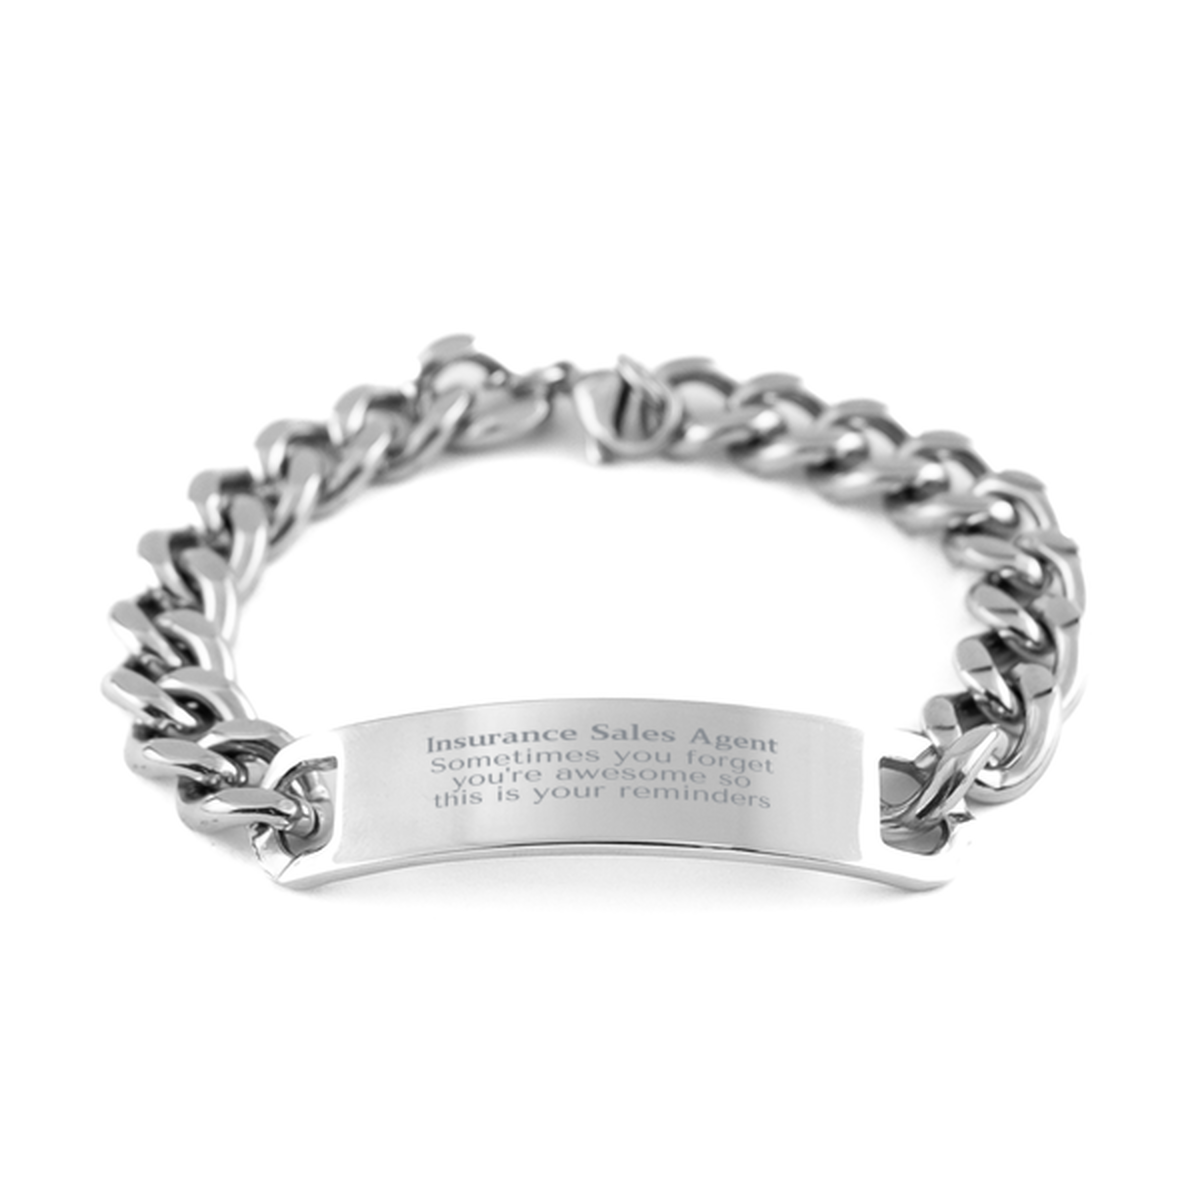 Sentimental Insurance Sales Agent Cuban Chain Stainless Steel Bracelet, Insurance Sales Agent Sometimes you forget you're awesome so this is your reminders, Graduation Christmas Birthday Gifts for Insurance Sales Agent, Men, Women, Coworkers